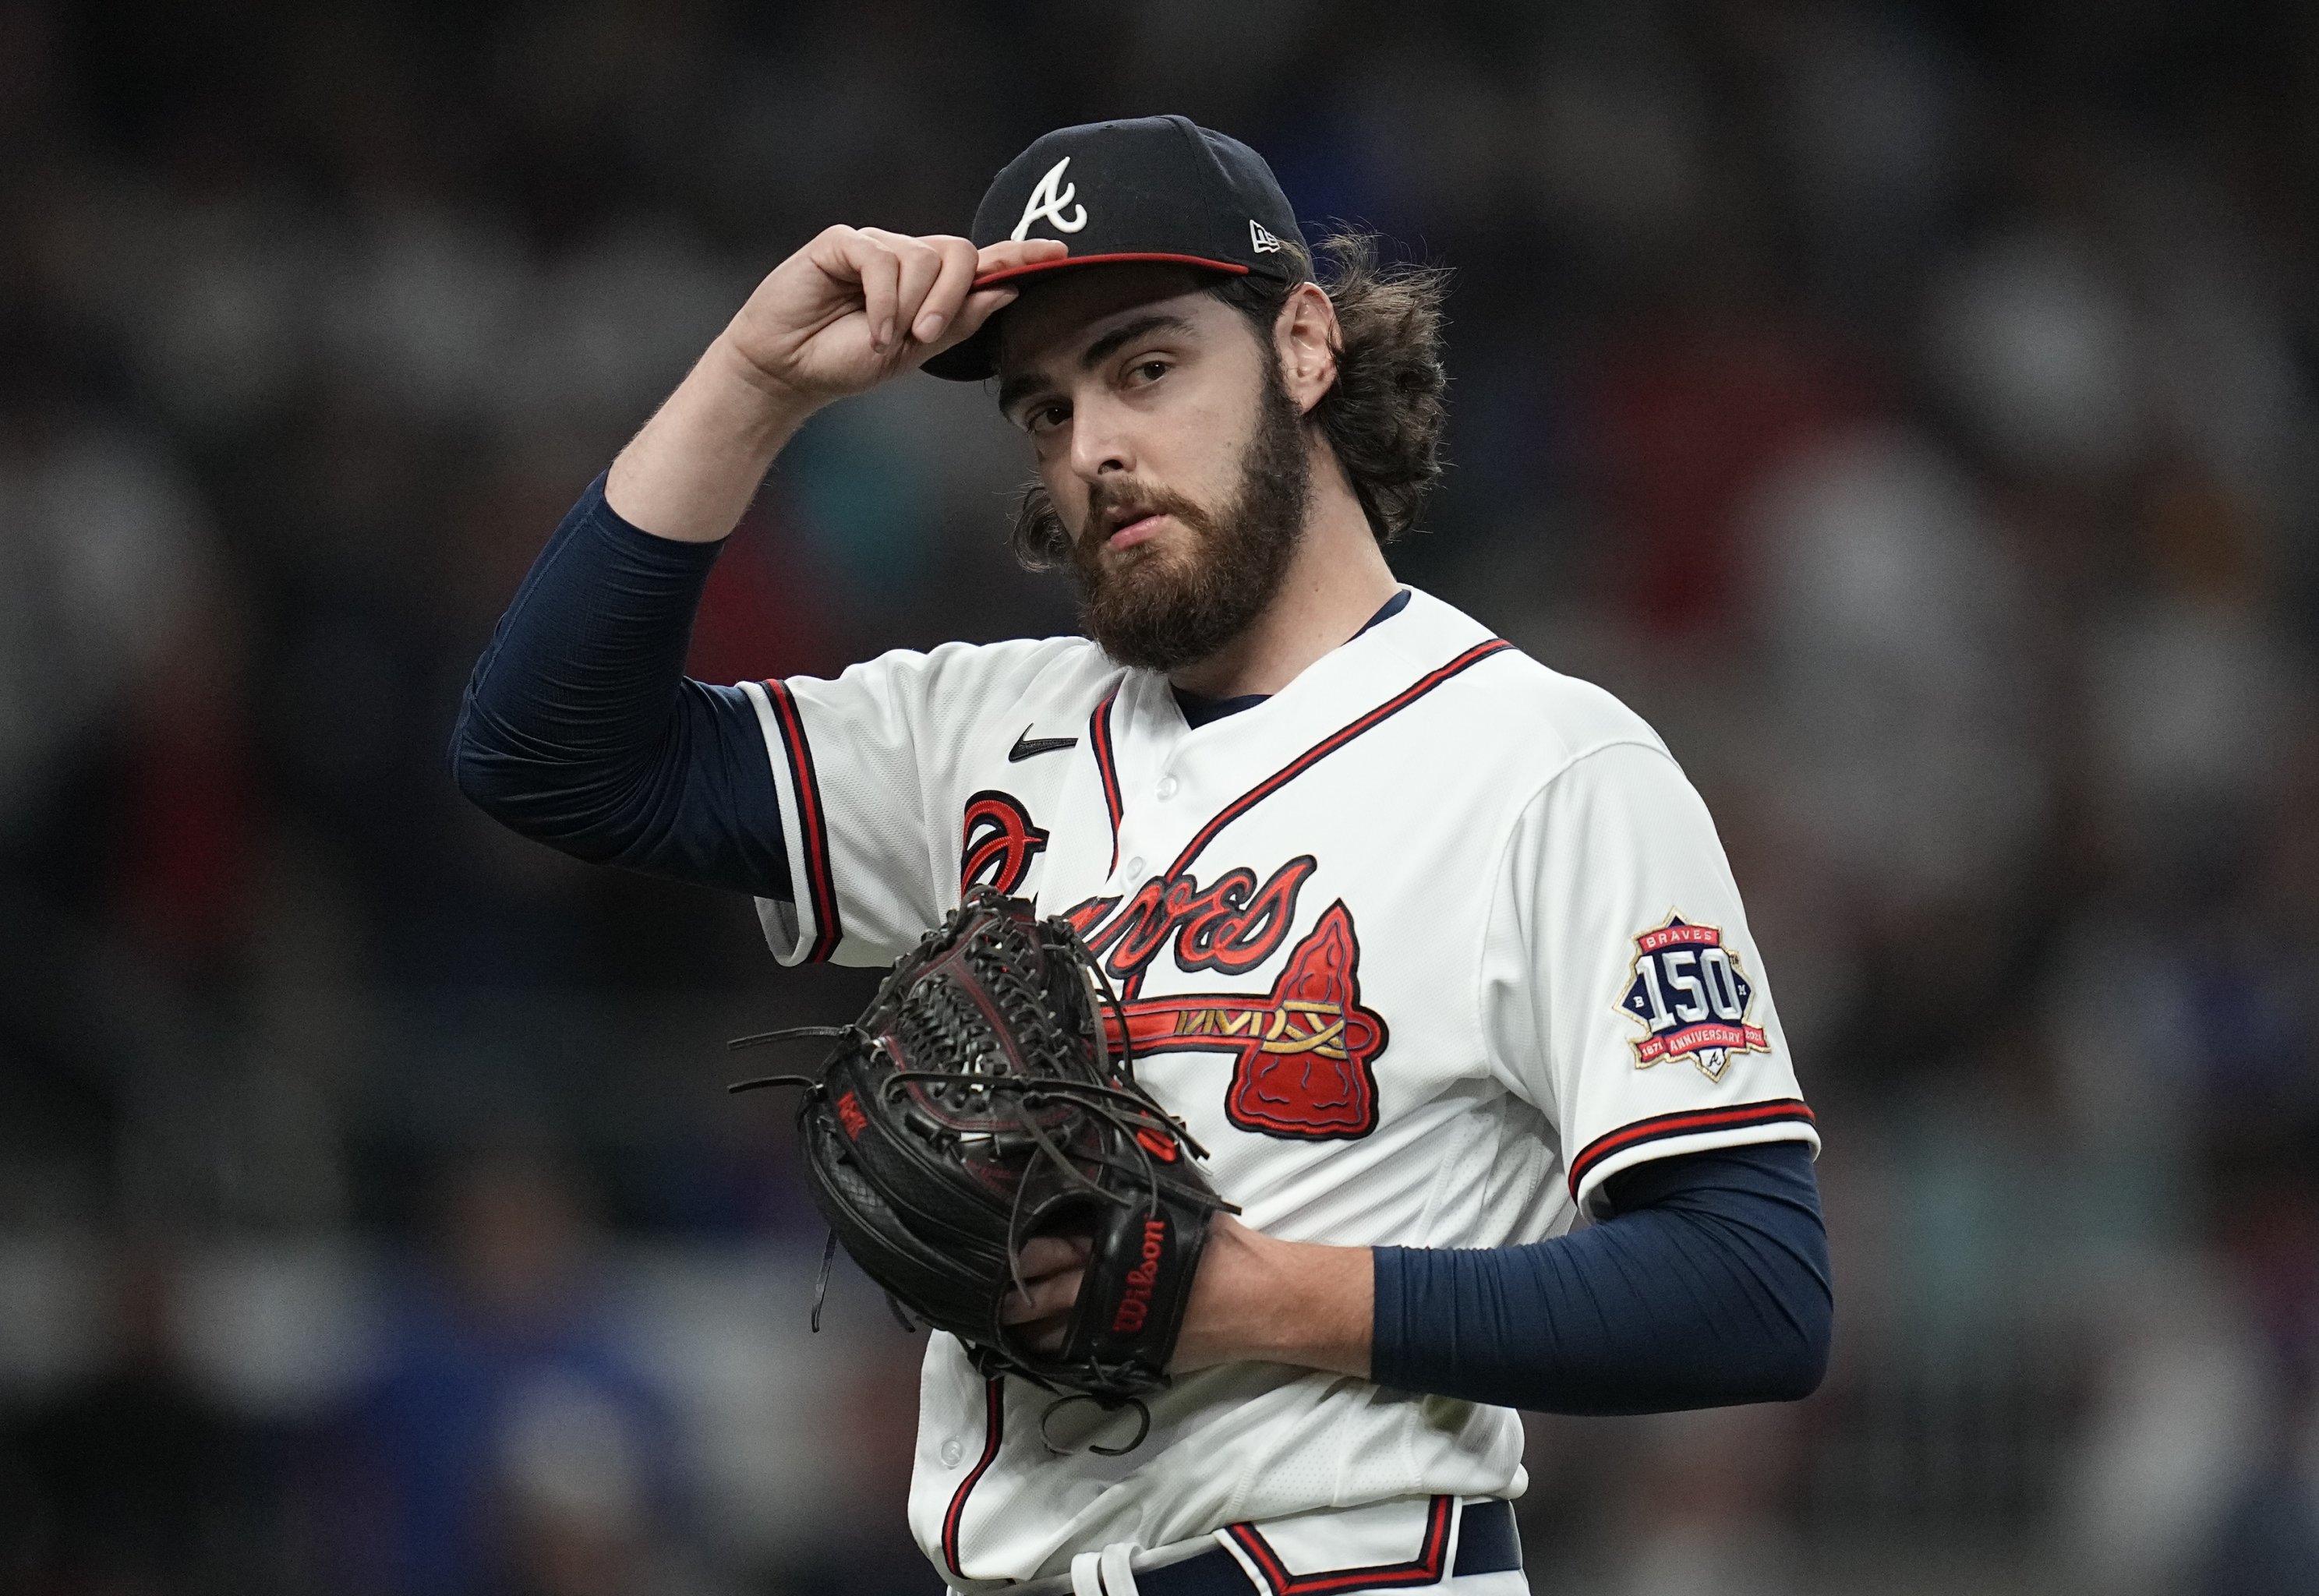 World Series 2021: Braves vs. Astros Game 3 Pitching Preview